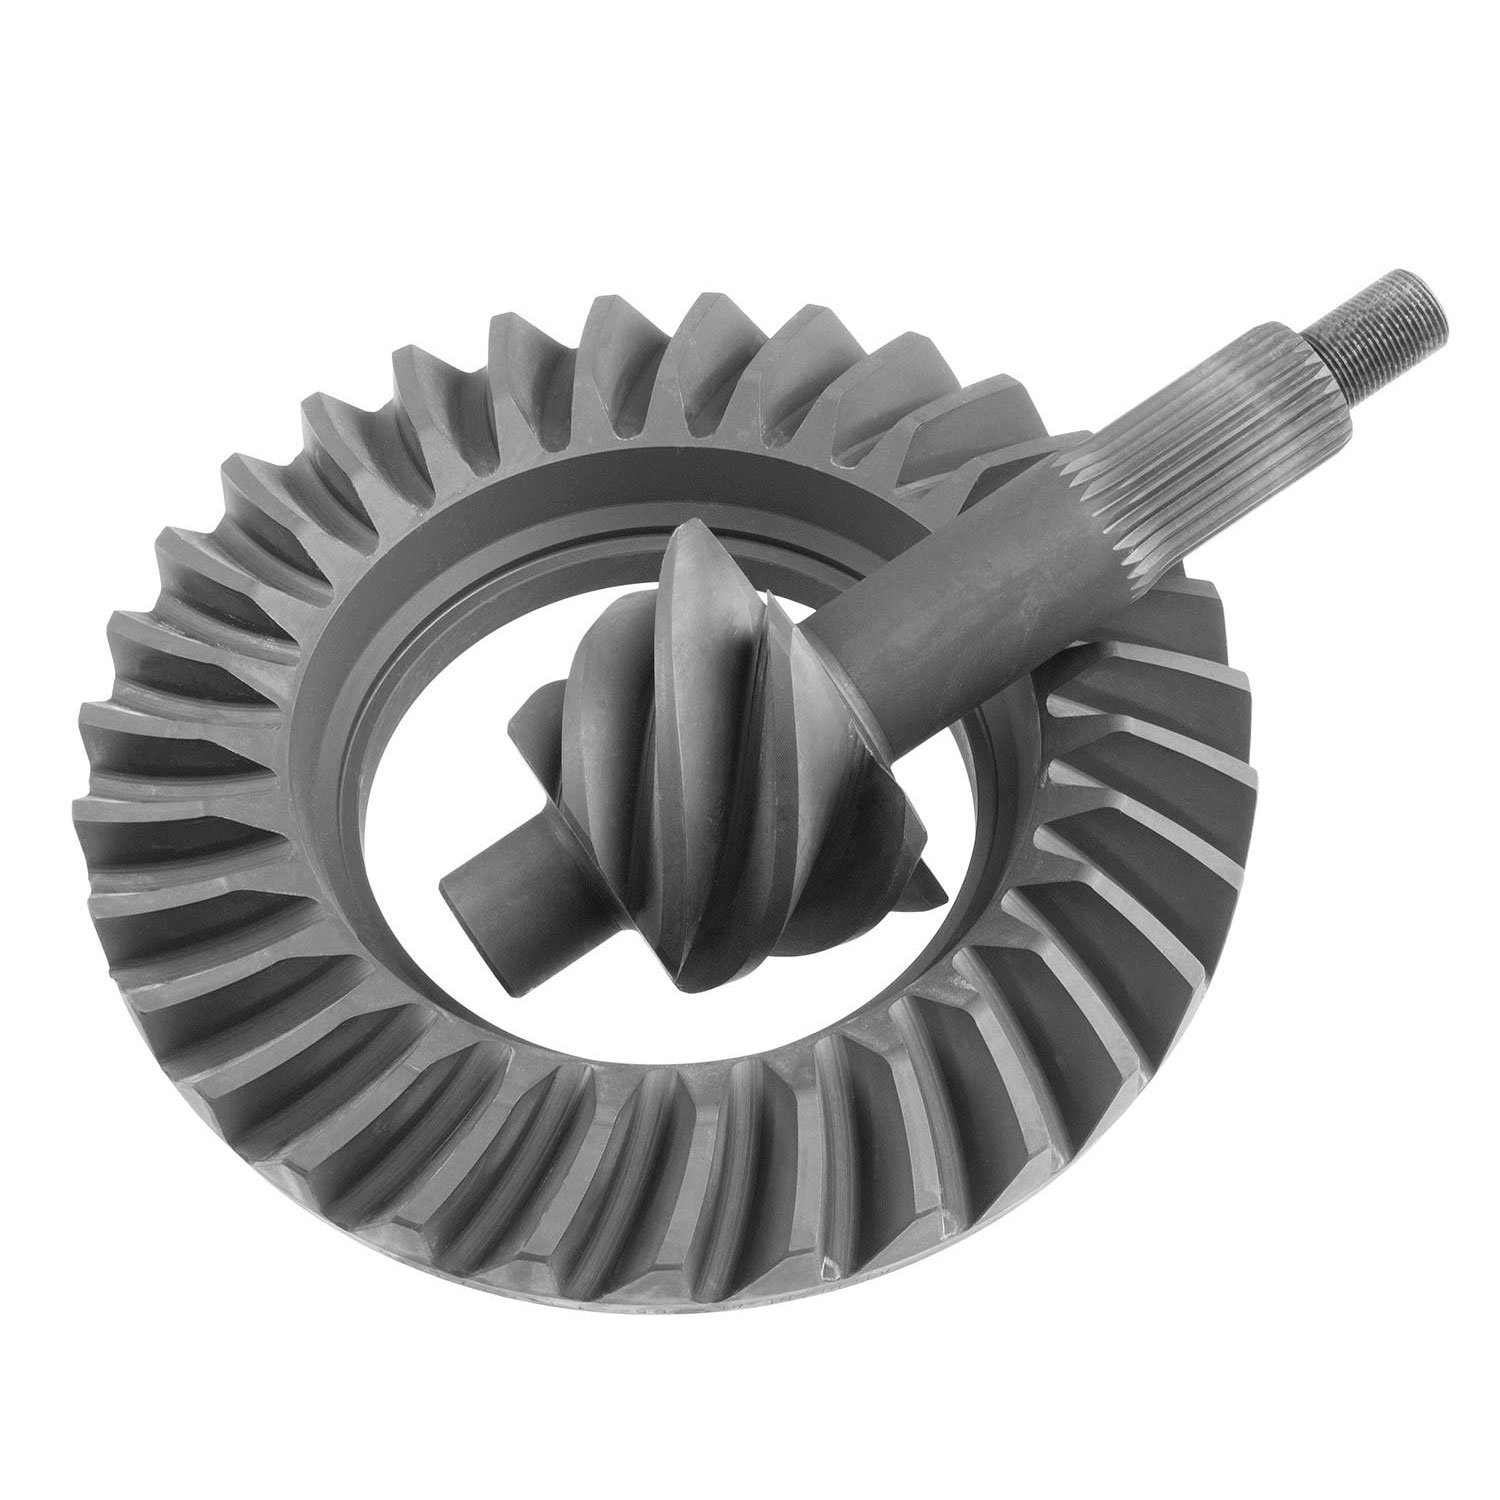 Ford 9.5" Pro Ring & Pinion Gear Set Ratio: 5.17